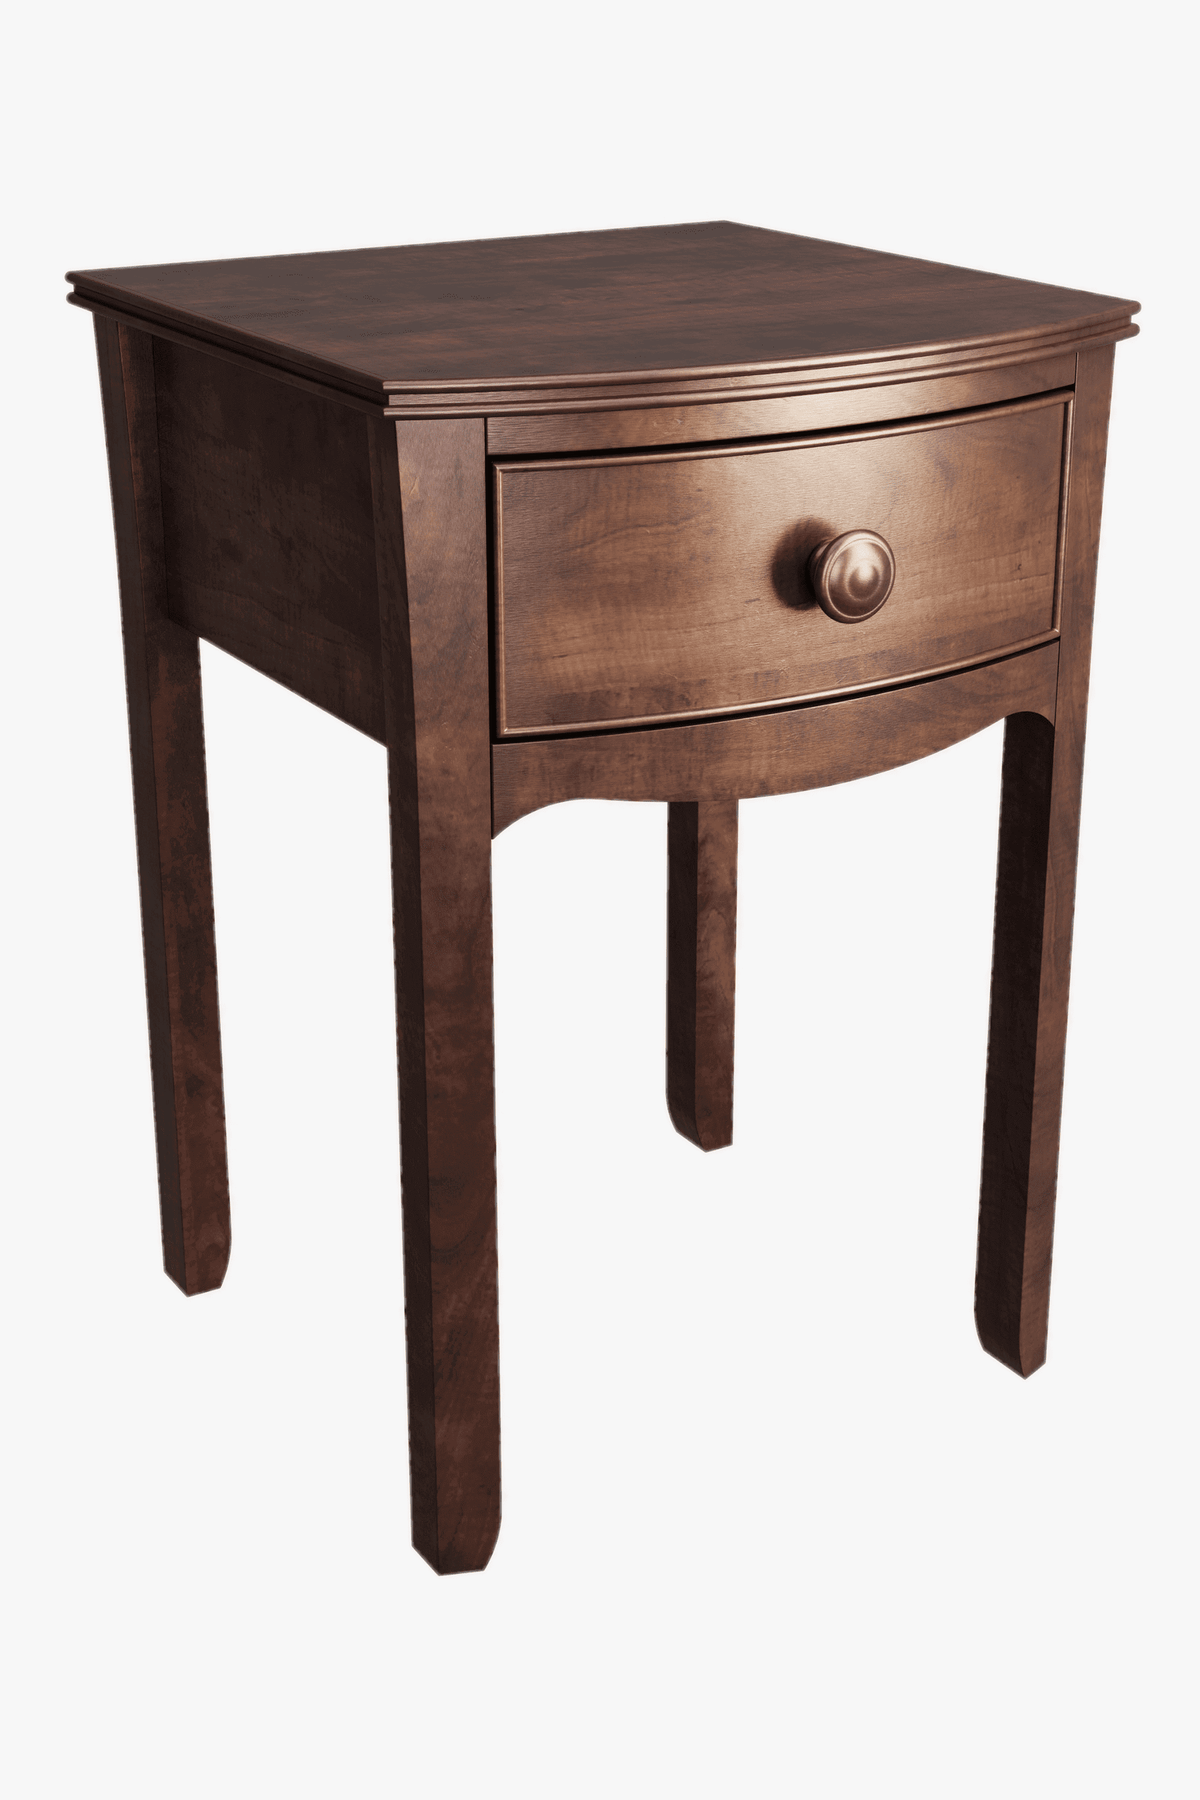 Broughton 1 Drawer Bedside Table